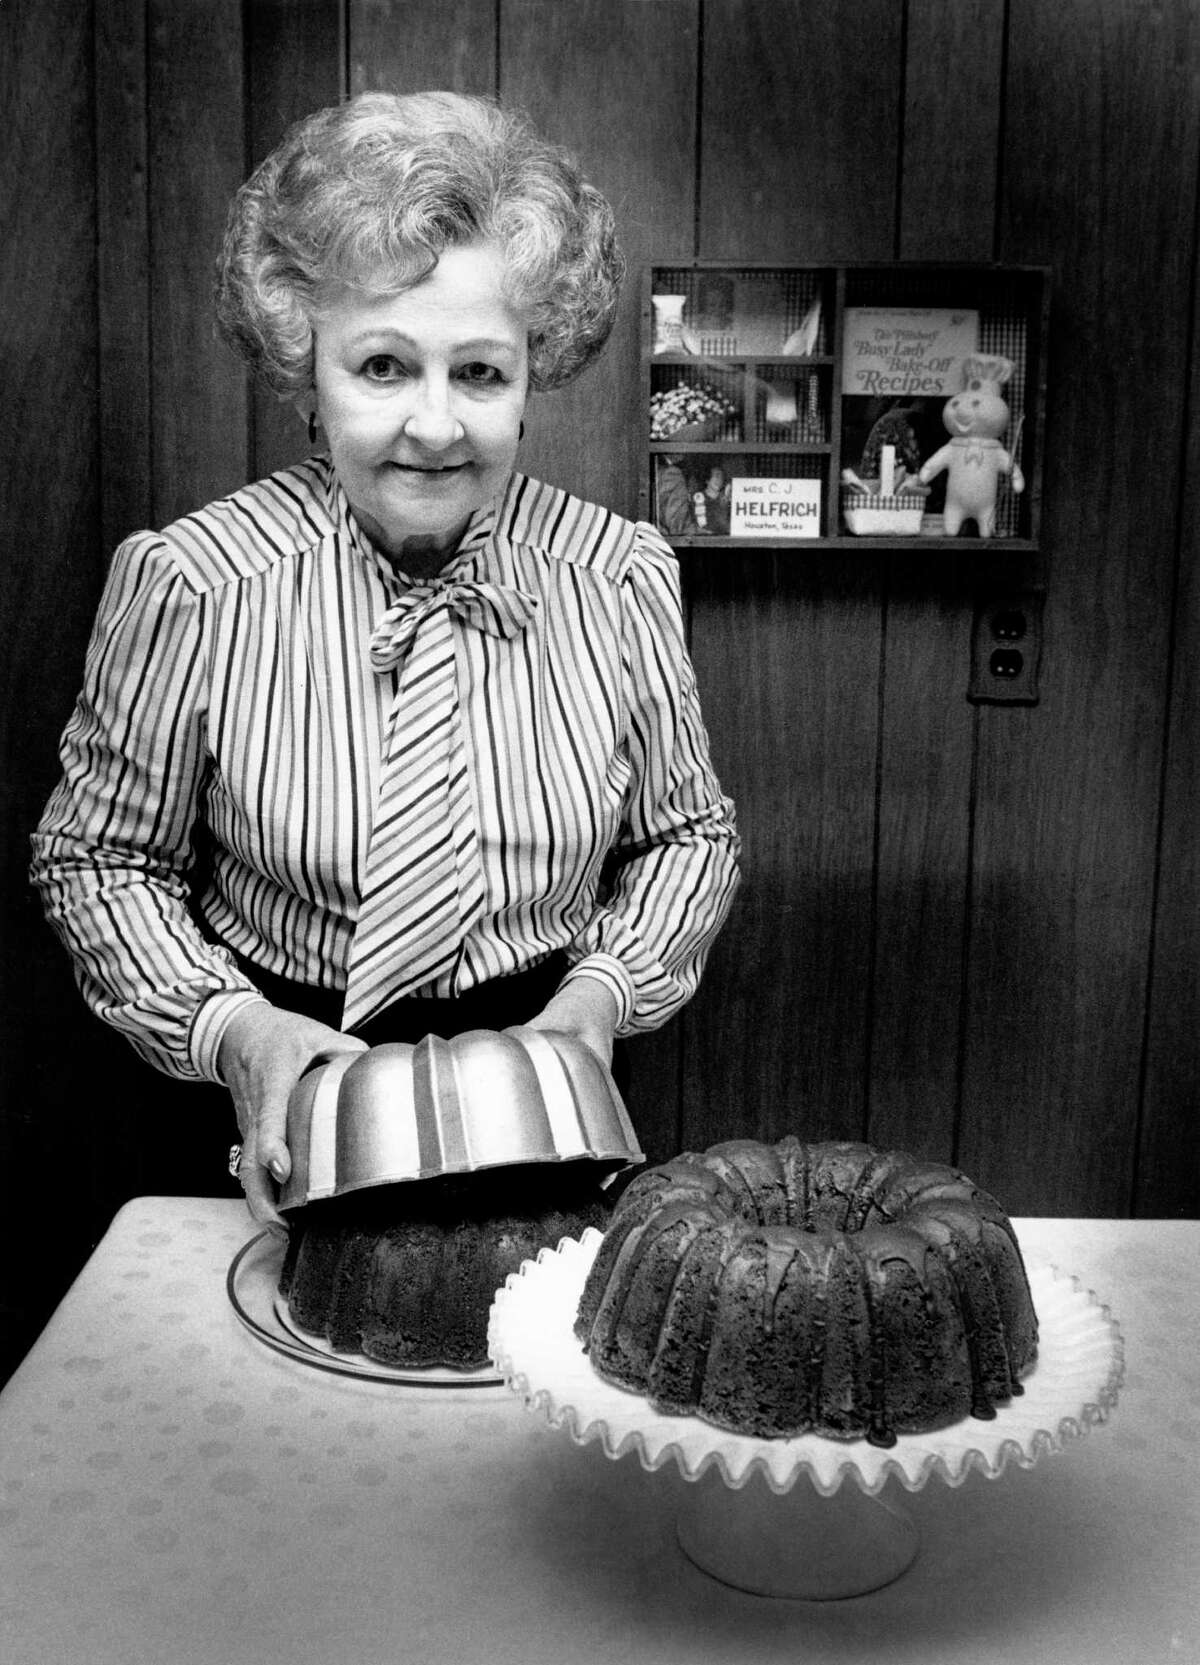 Ella Rita Helfrich is pictured in 1983 with her award-winning Tunnel of Fudge Cake. Helfrich won second place with the cake in the 1966 Pillsbury Bake-off in San Francisco.